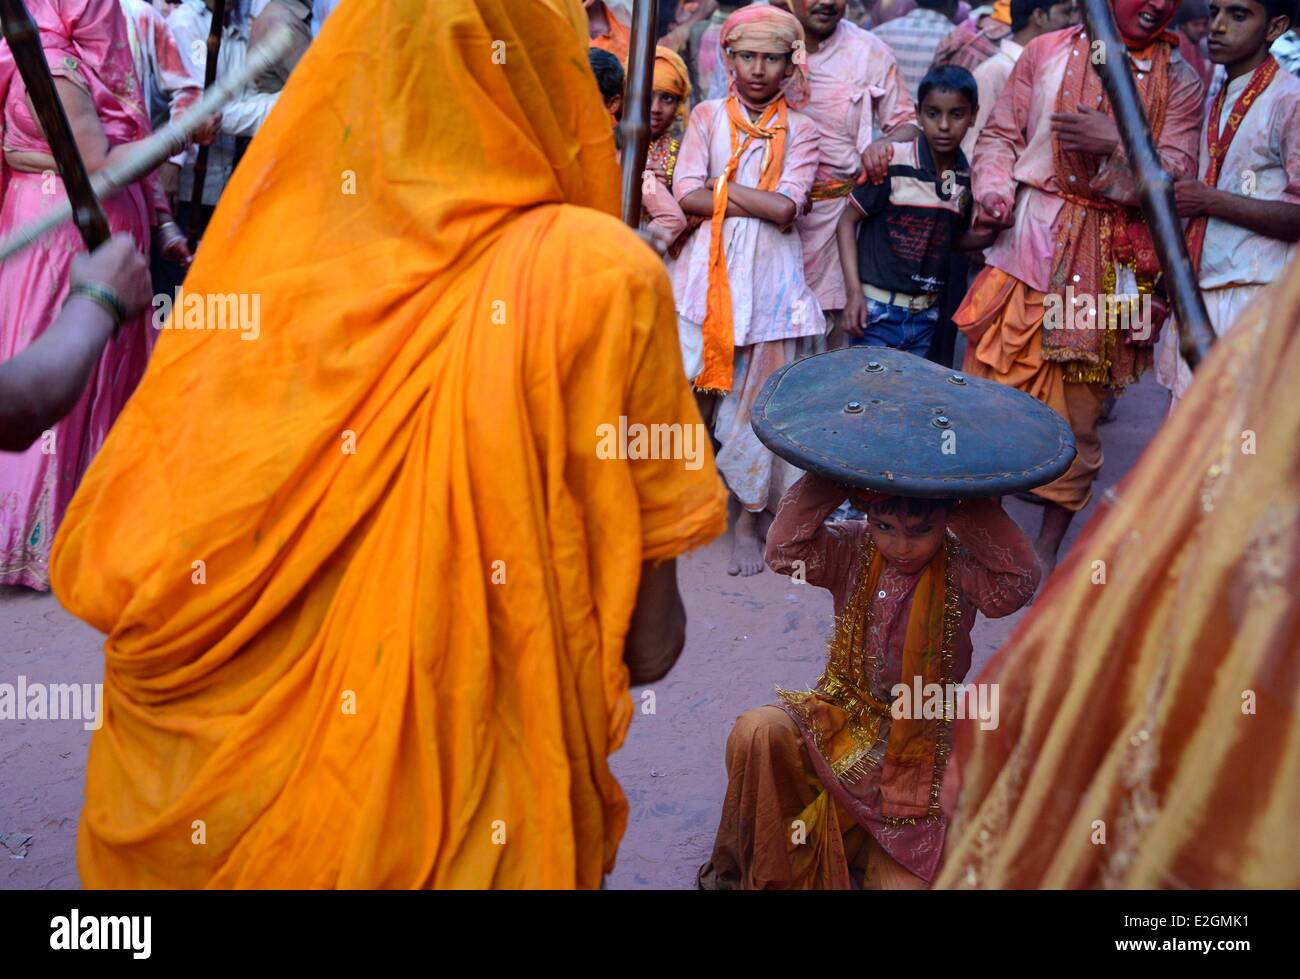 India Uttar Pradesh State in Barsana city during celebration of Lathmar Holi on this particular occasion women have freedom to beat men folk with long bamboo sticks called lathis men are only allowed to protect themselves with shields Stock Photo